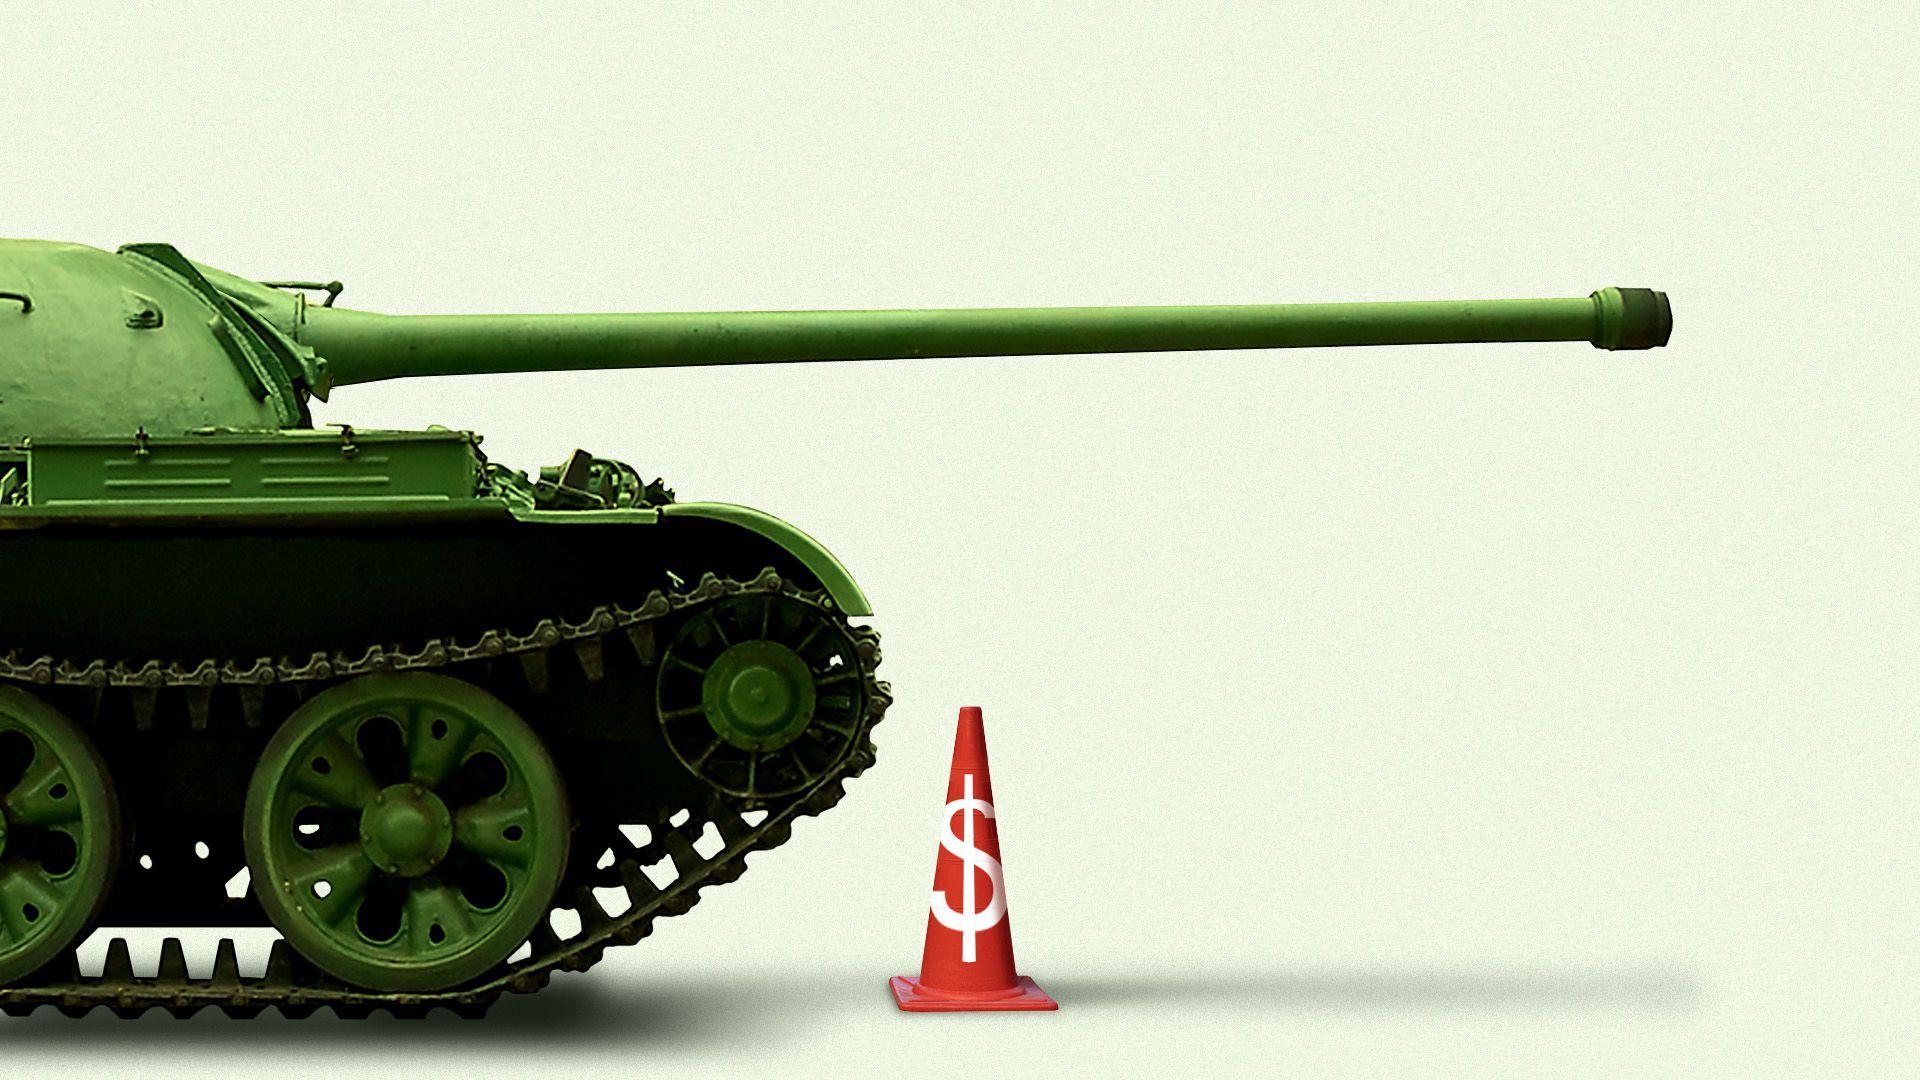 Illustration of roadwork cone with a dollar sign on it next to an army tank